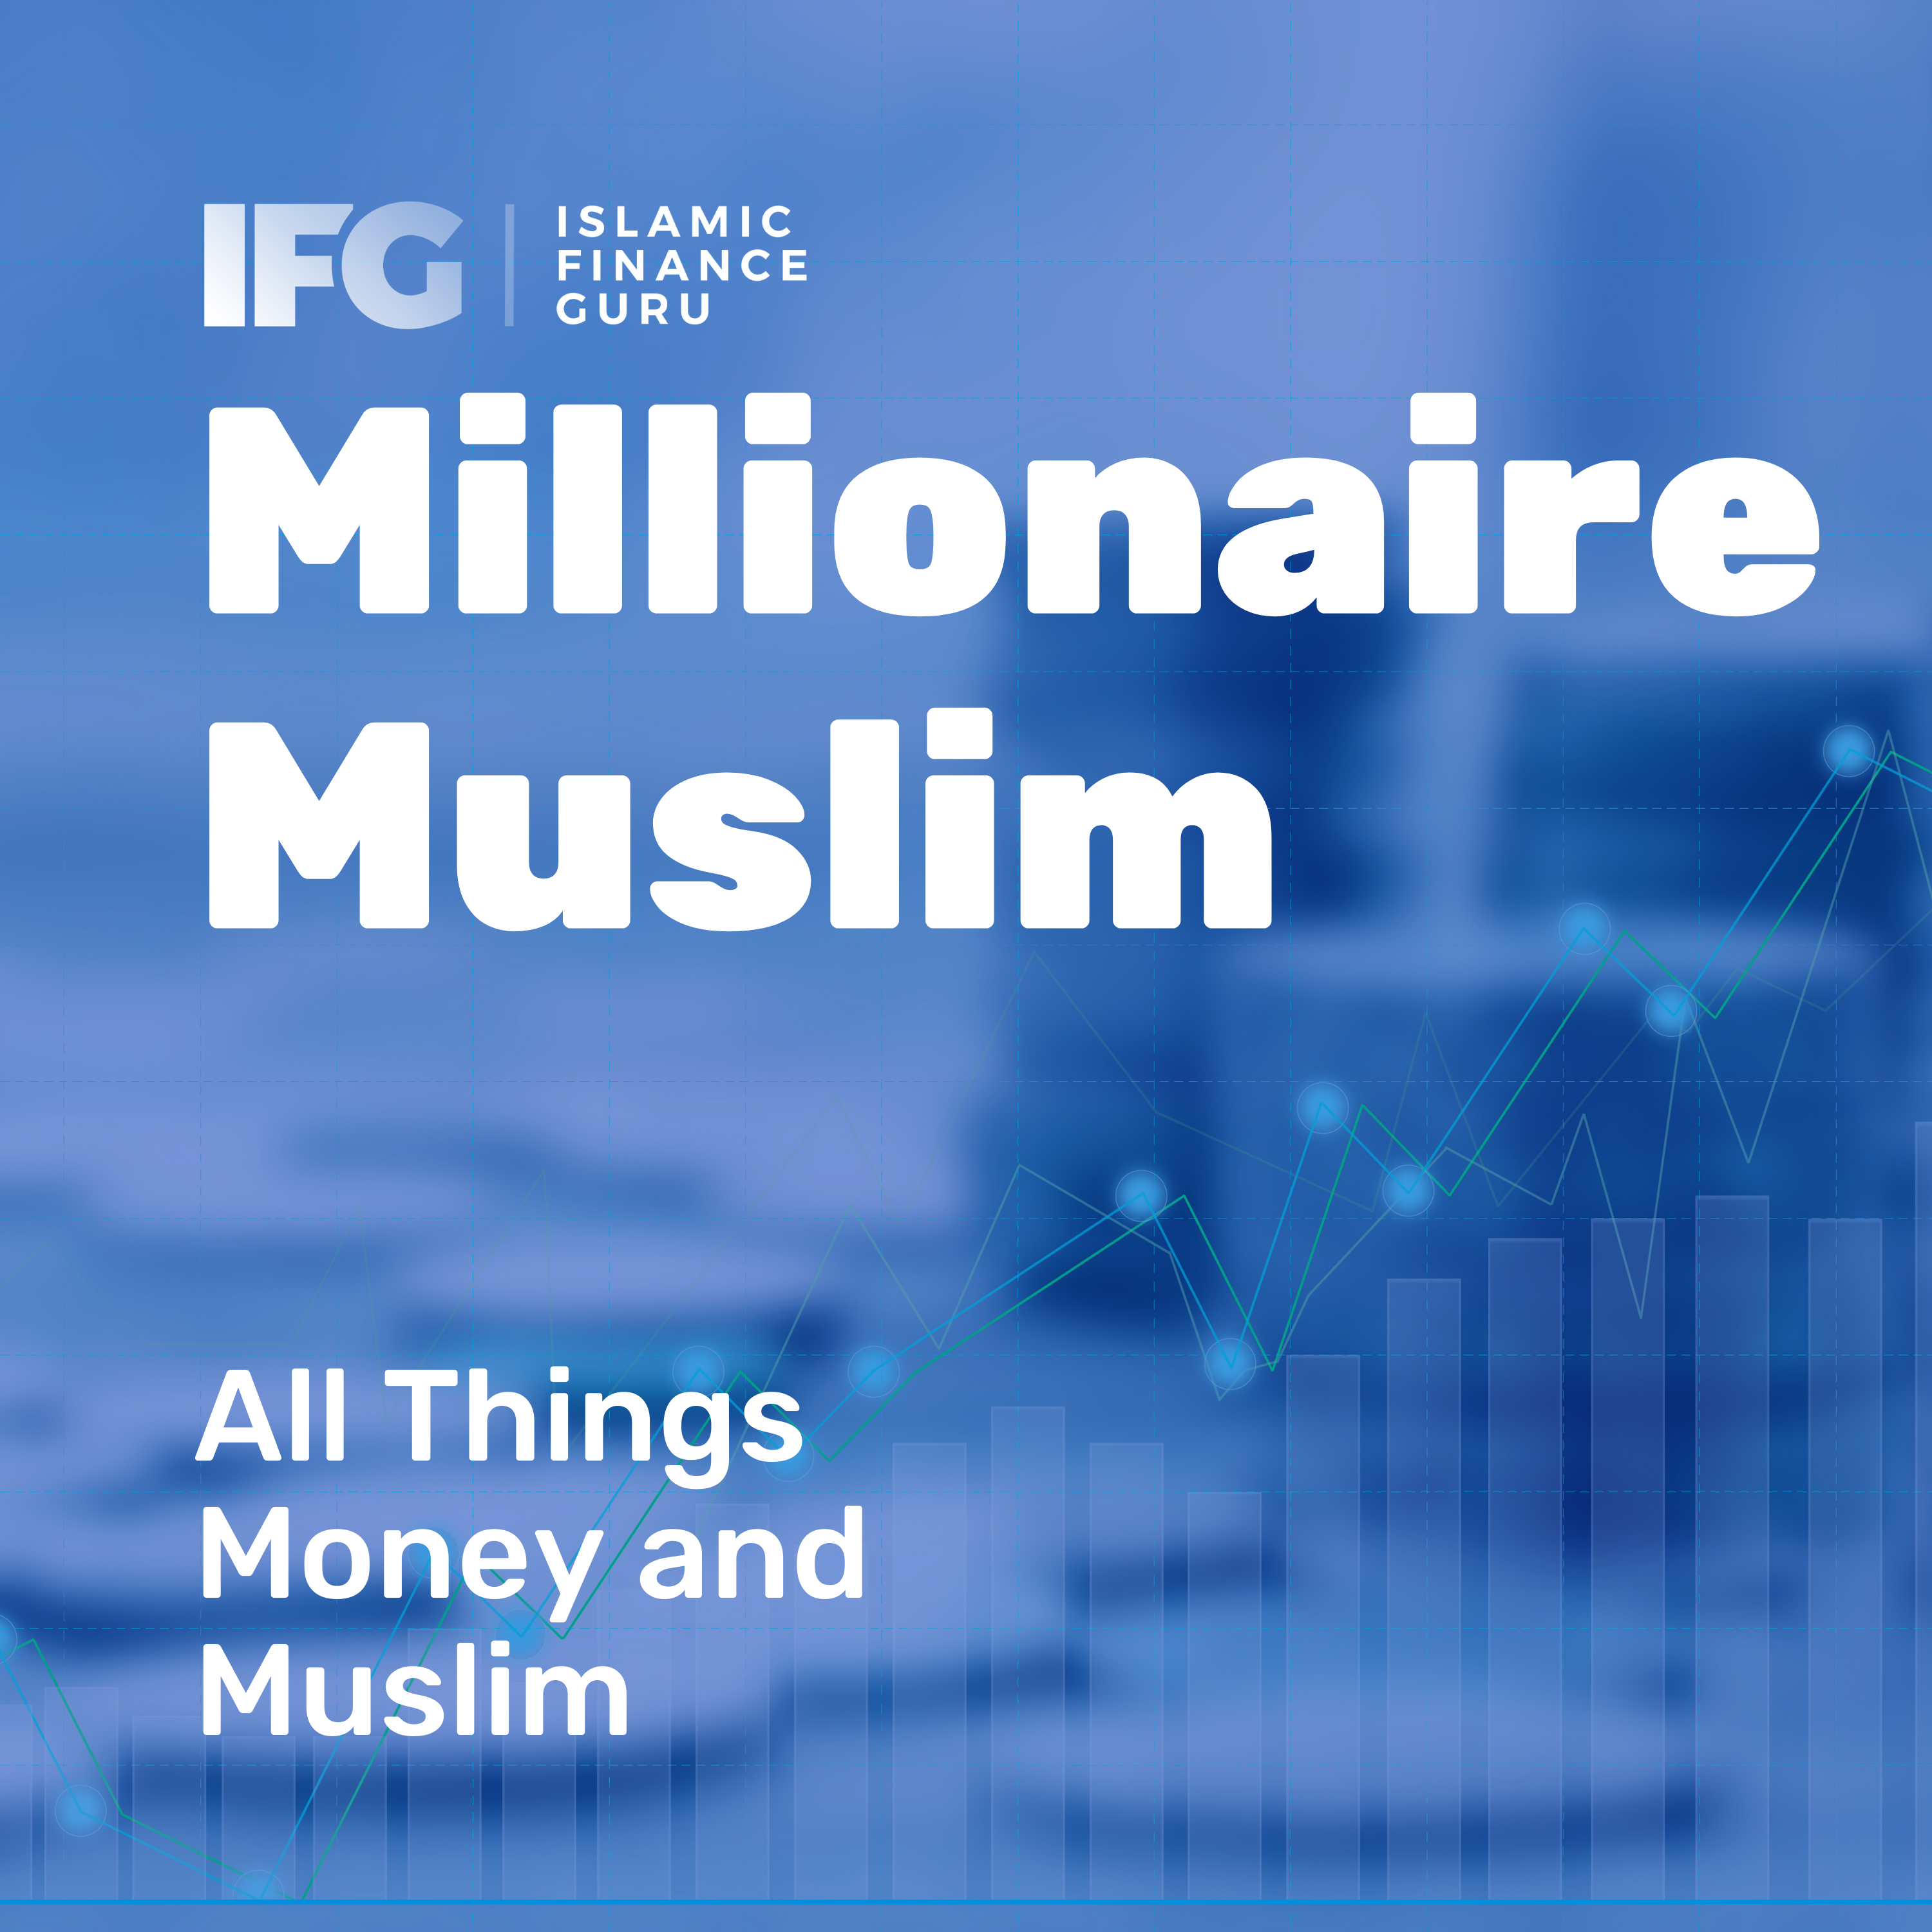 E19 Podcast: Love & Finance: What You Need to Know | IFG Featured Image